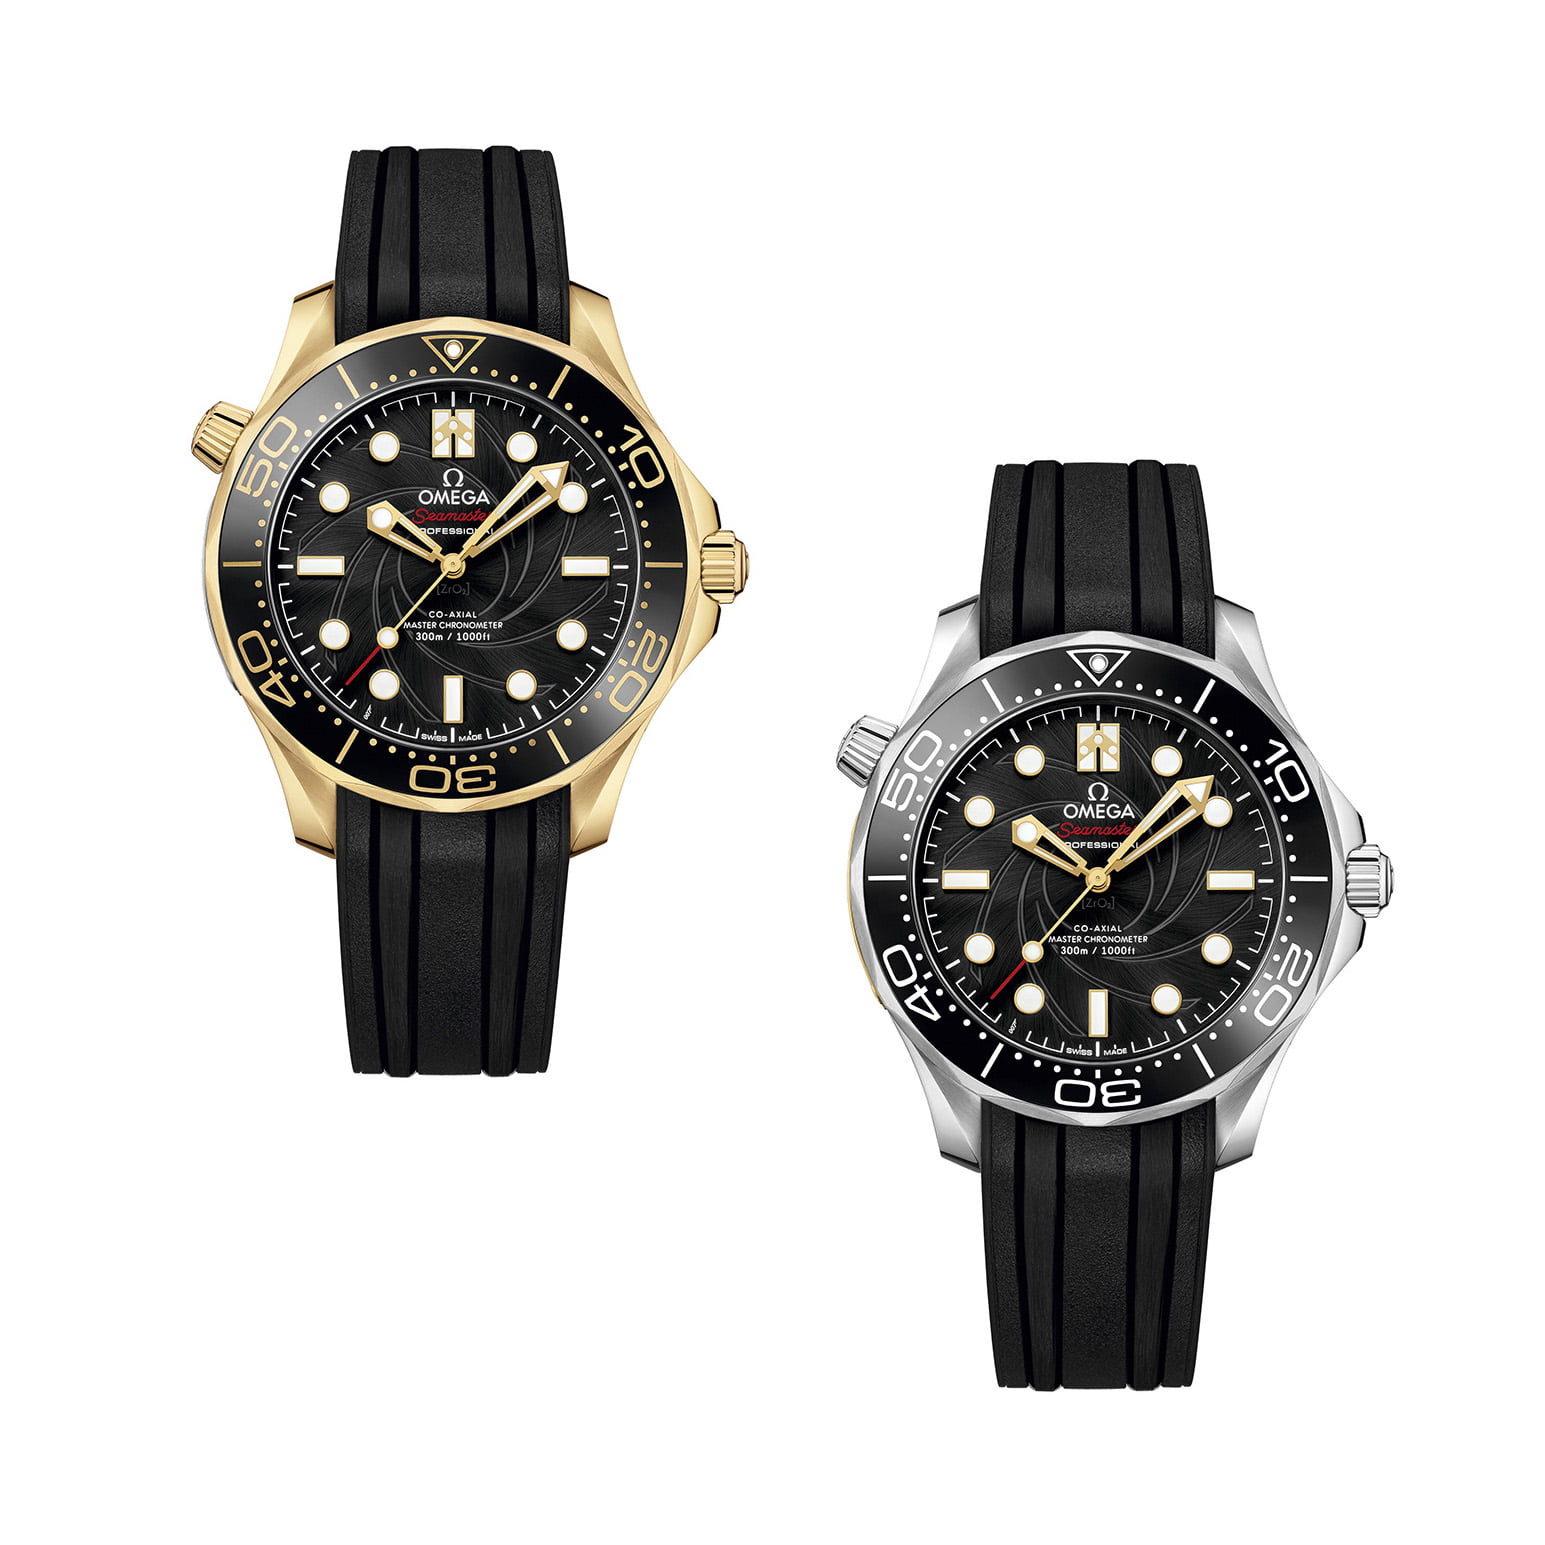 OMEGA, A SET OF TWO LIMITED EDITION ON HER MAJESTY'S SECRET SERVICE 50TH ANNIVERSARY AUTOMATIC WRISTWATCHES, ONE CASED IN YELLOW GOLD, THE OTHER, STAINLESS STEEL, PRESENTED IN A FITTED GLOBE-TROTTER CASE, THE DUST COVER SIGNED BY GEORGE LAZENBY 